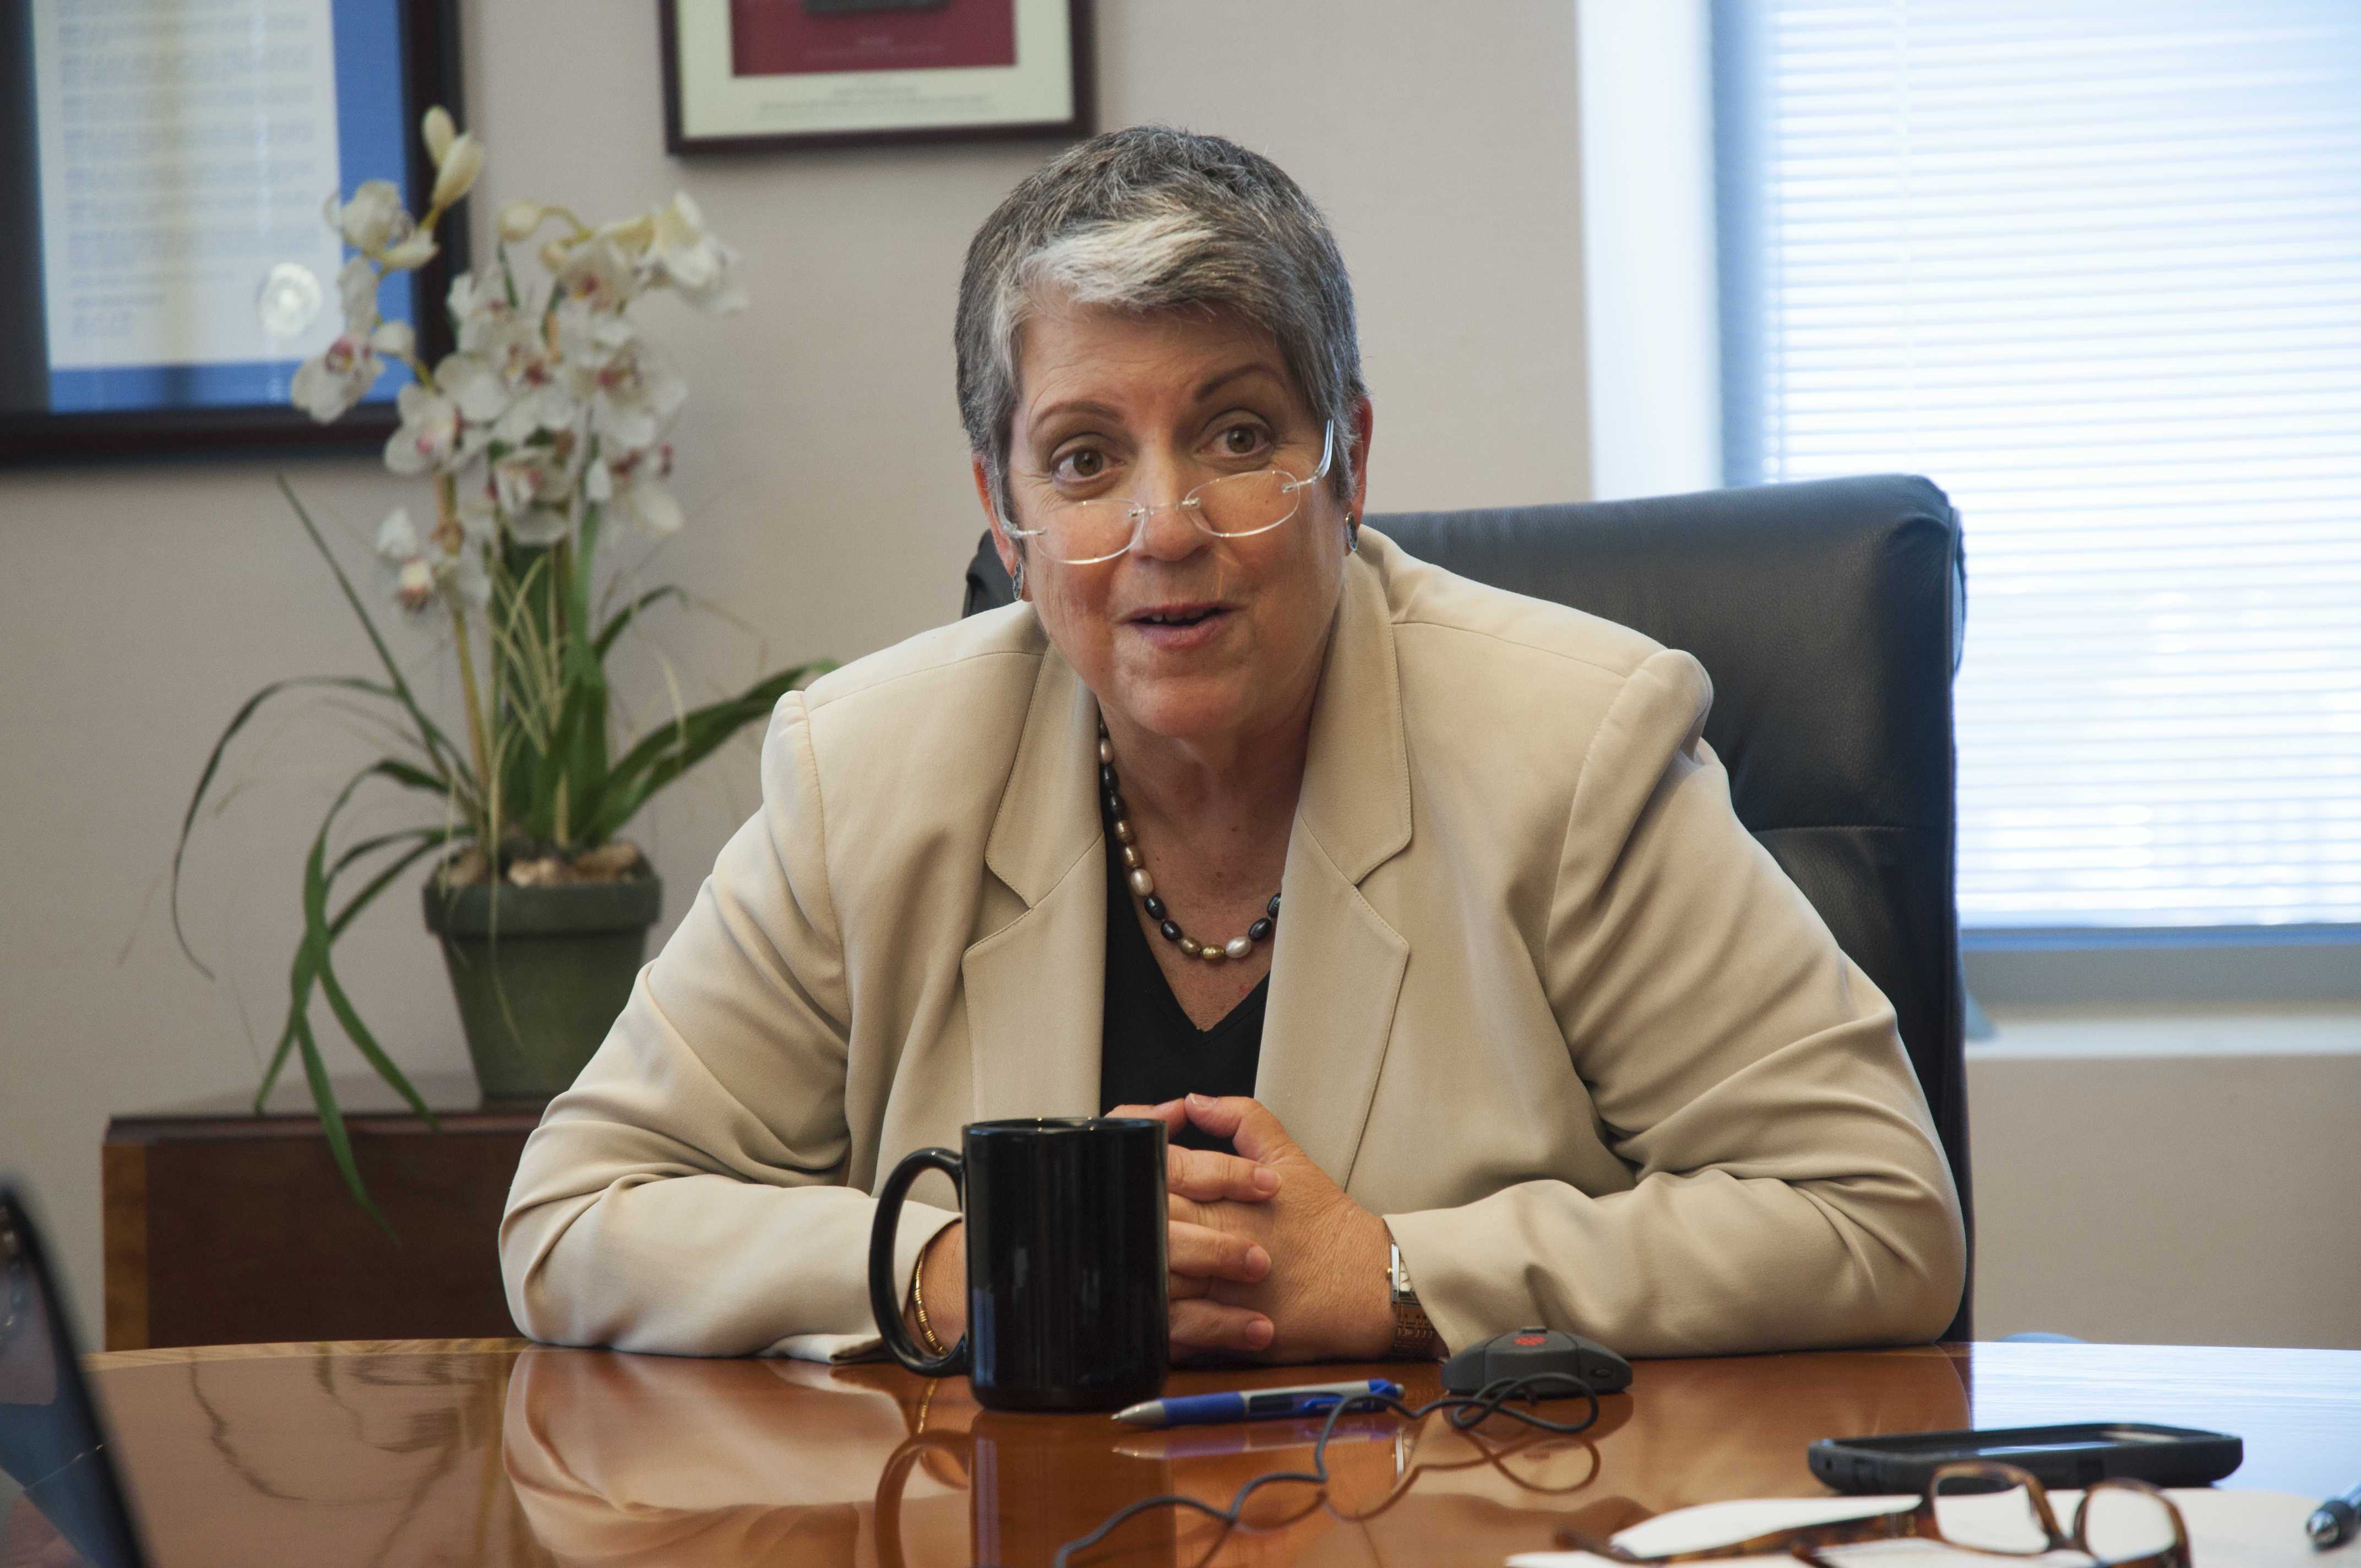 Plan-it Janet A five-year plan outlined by University of California President Janet Napolitano accounts for annual increases in tuition of up to 5 percent. Above, Napolitano speaks with UC Campus media in her office in October.  Photo by Taylor Sanderson/Guardian.